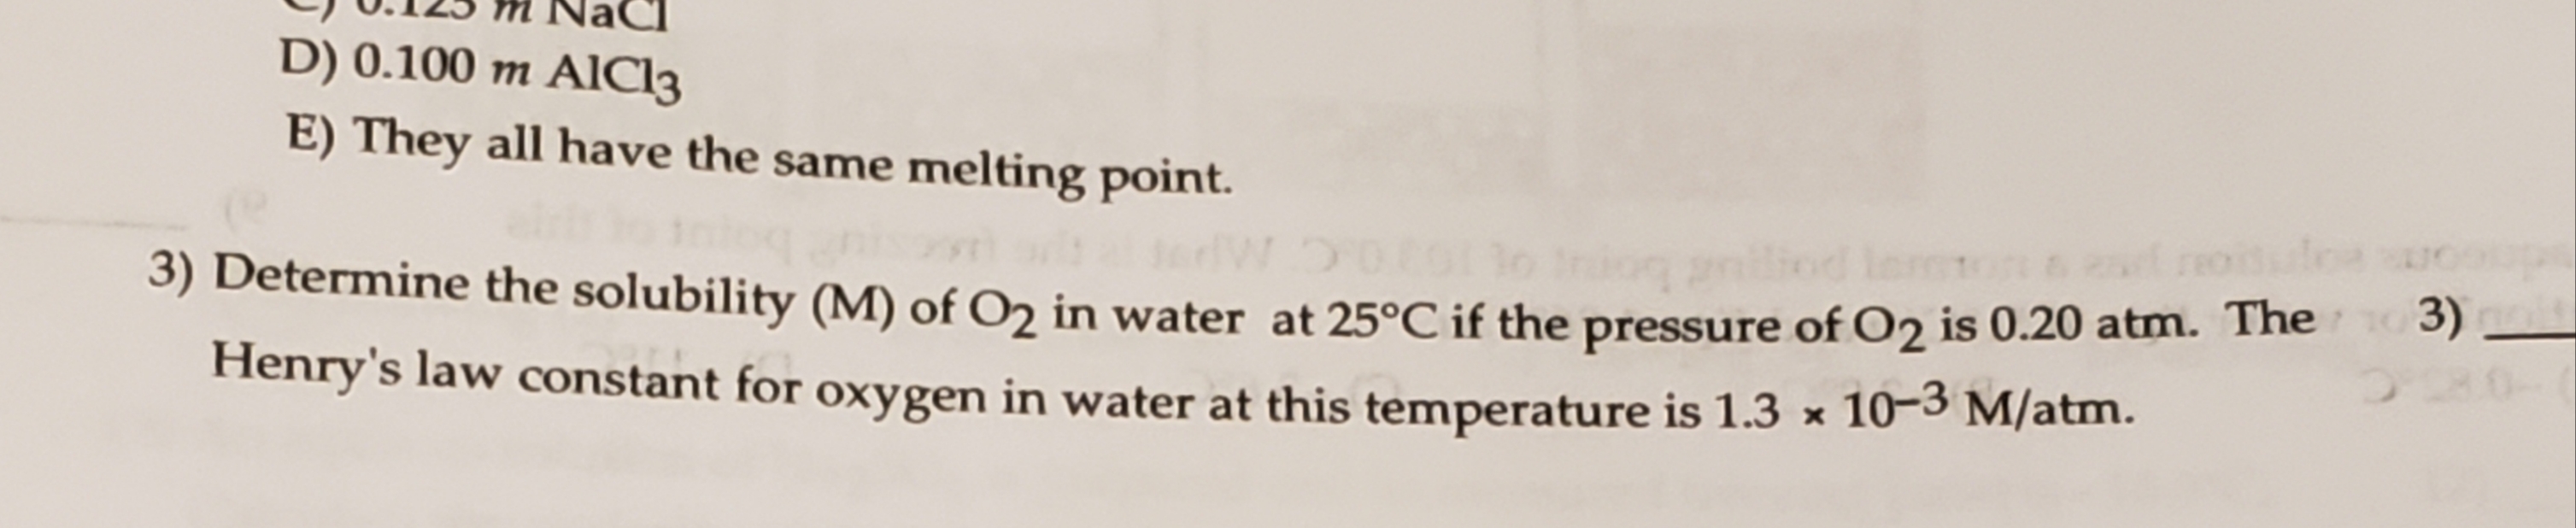 q0125 M NaC]
D) 0.100 m AlCl3
E) They all have the same melting point.
5)
3) Determine the solubility (M) of O2 in water at 25°C if the pressure of O2 is 0.20 atm. The
Henry's law constant for oxygen in water at this temperature is 1.3 x 10-3 M/atm.
